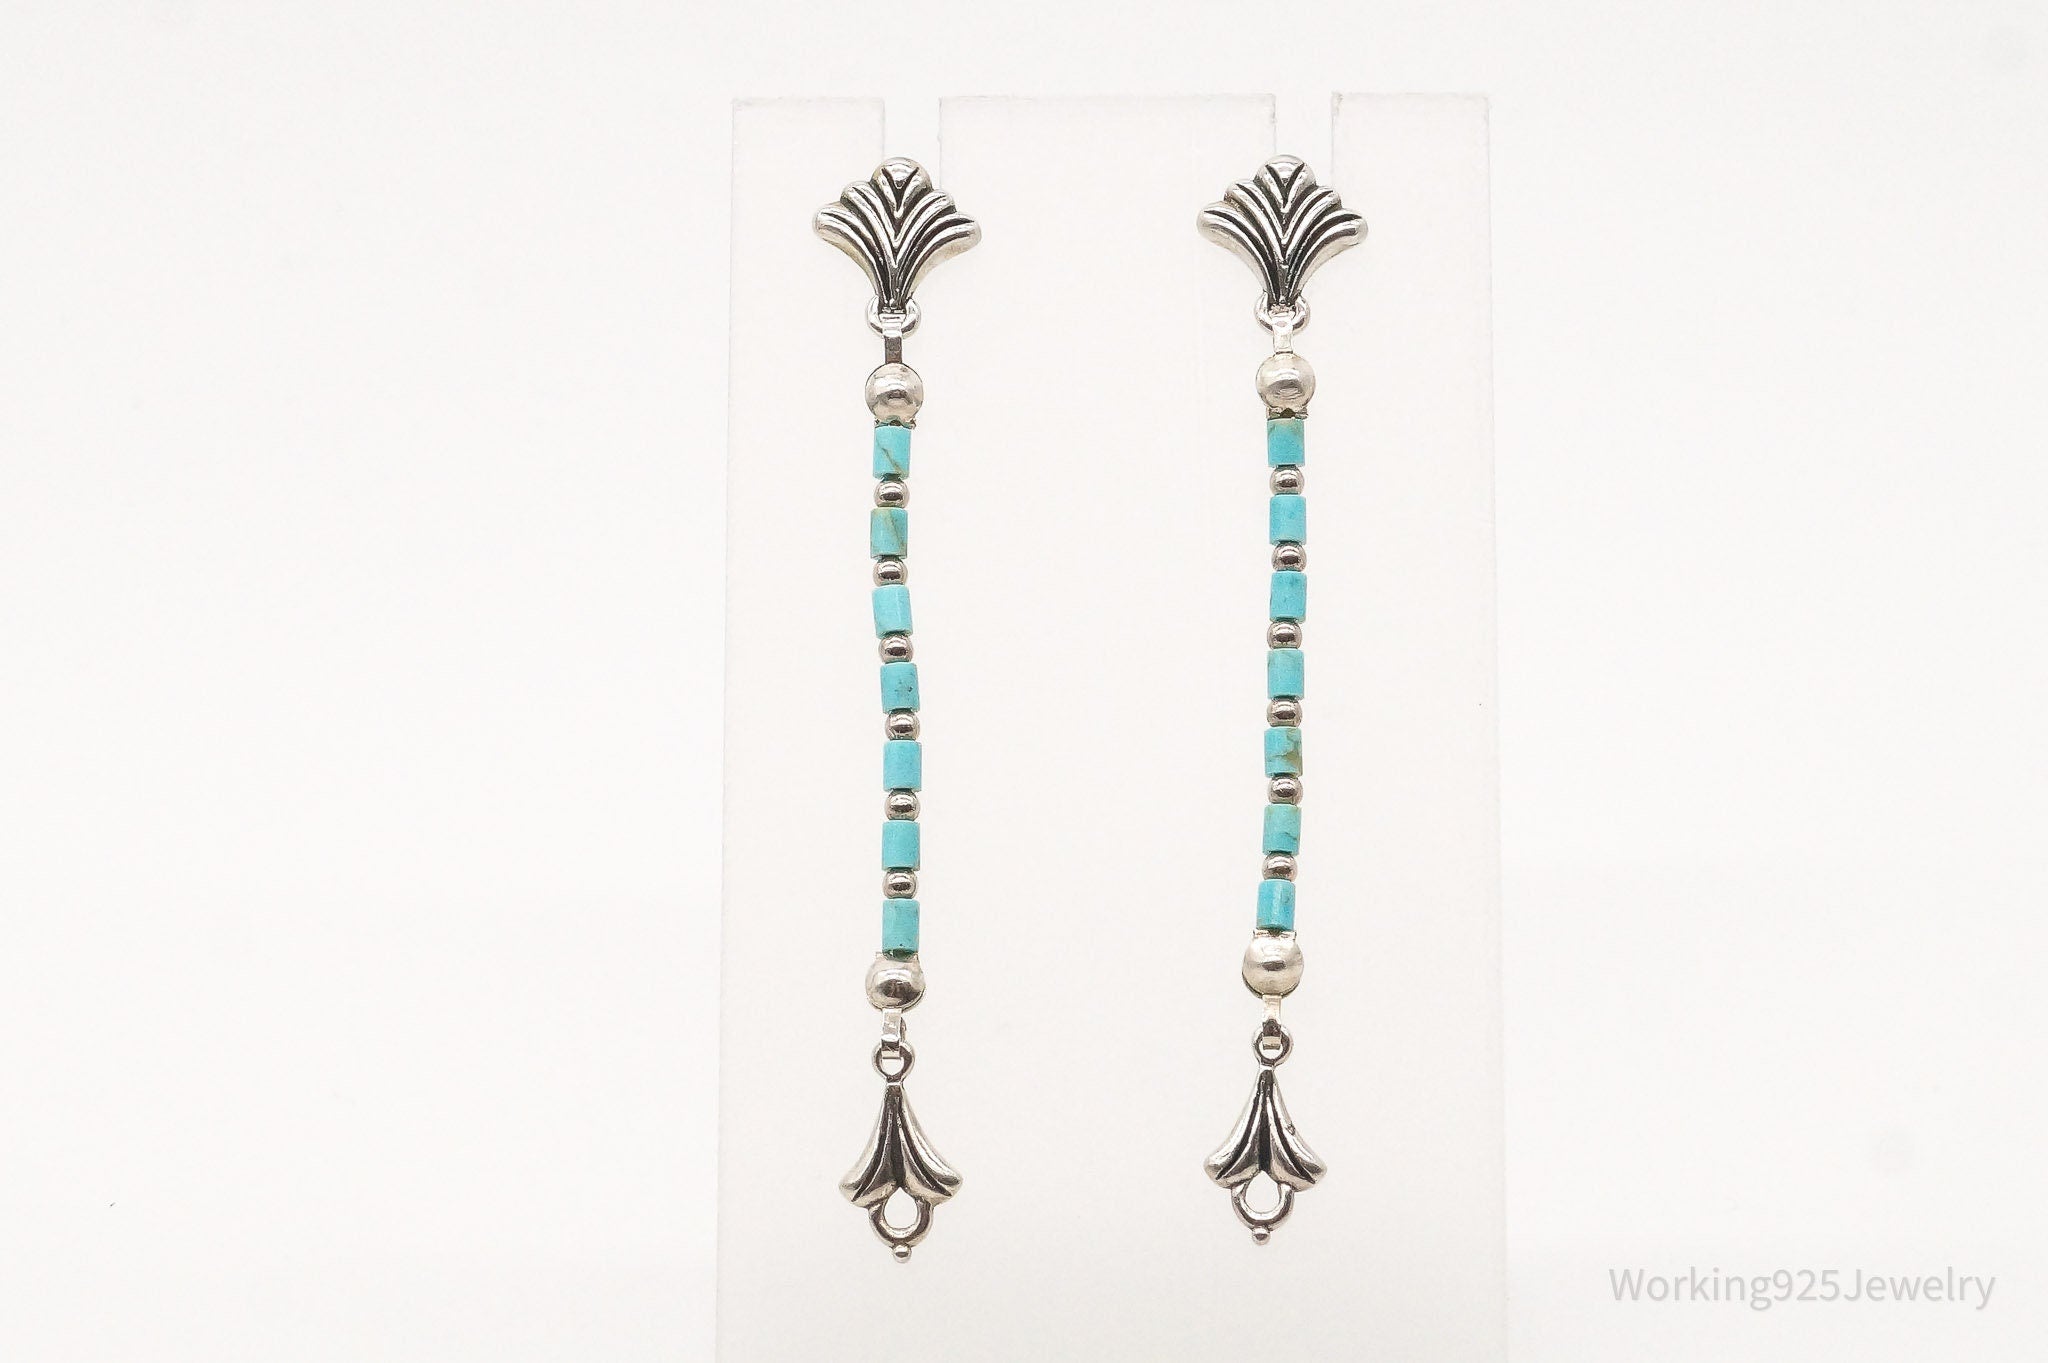 Western Designer Carolyn Pollack Relios Turquoise Sterling Silver Earrings